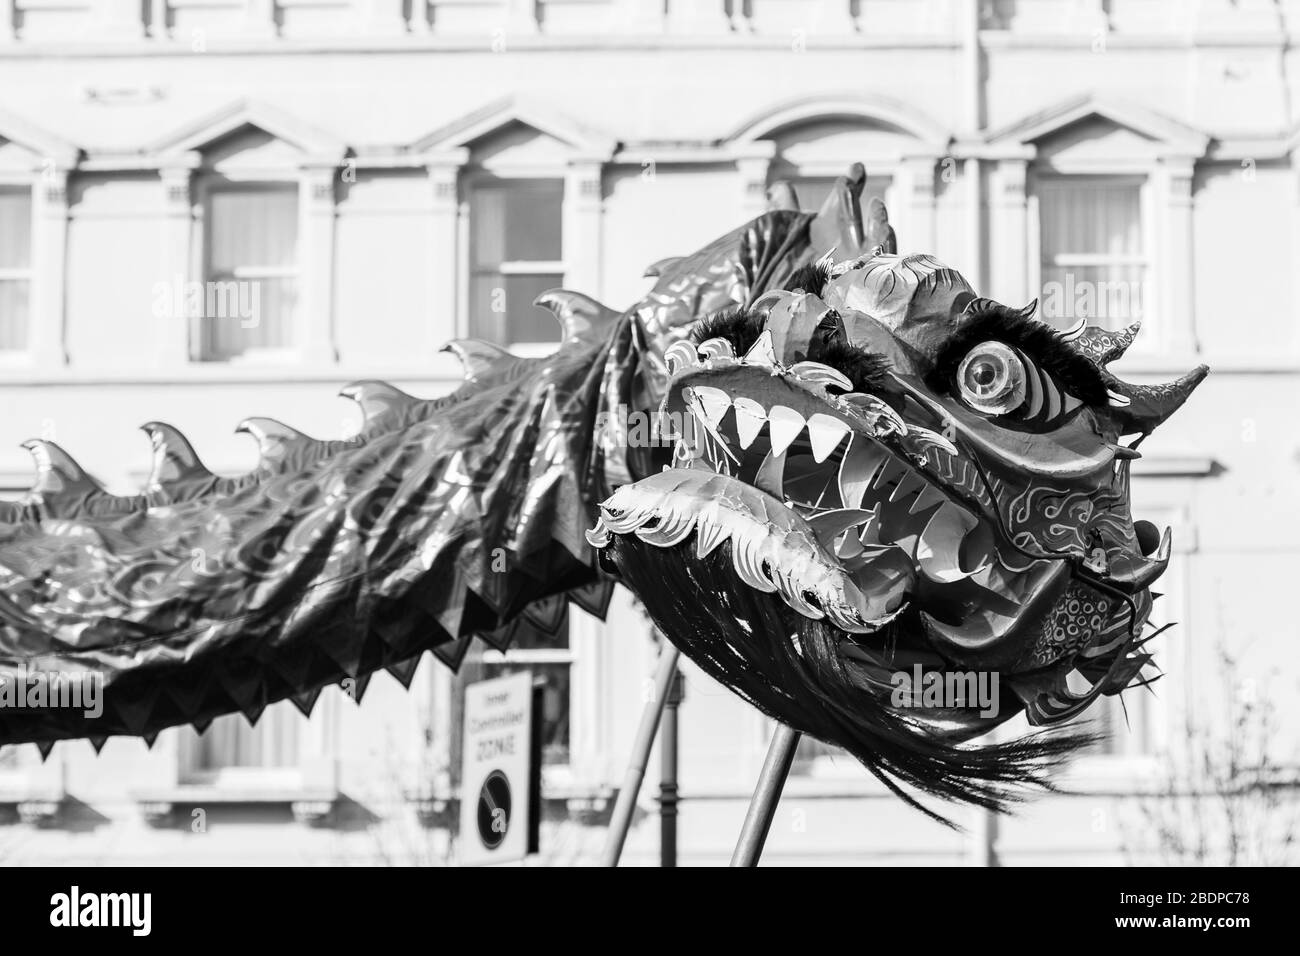 Up close with the vivid orange coloured dragon as it dances through the streets of Liverpool's Chinatown district during the new year celebrations. Stock Photo